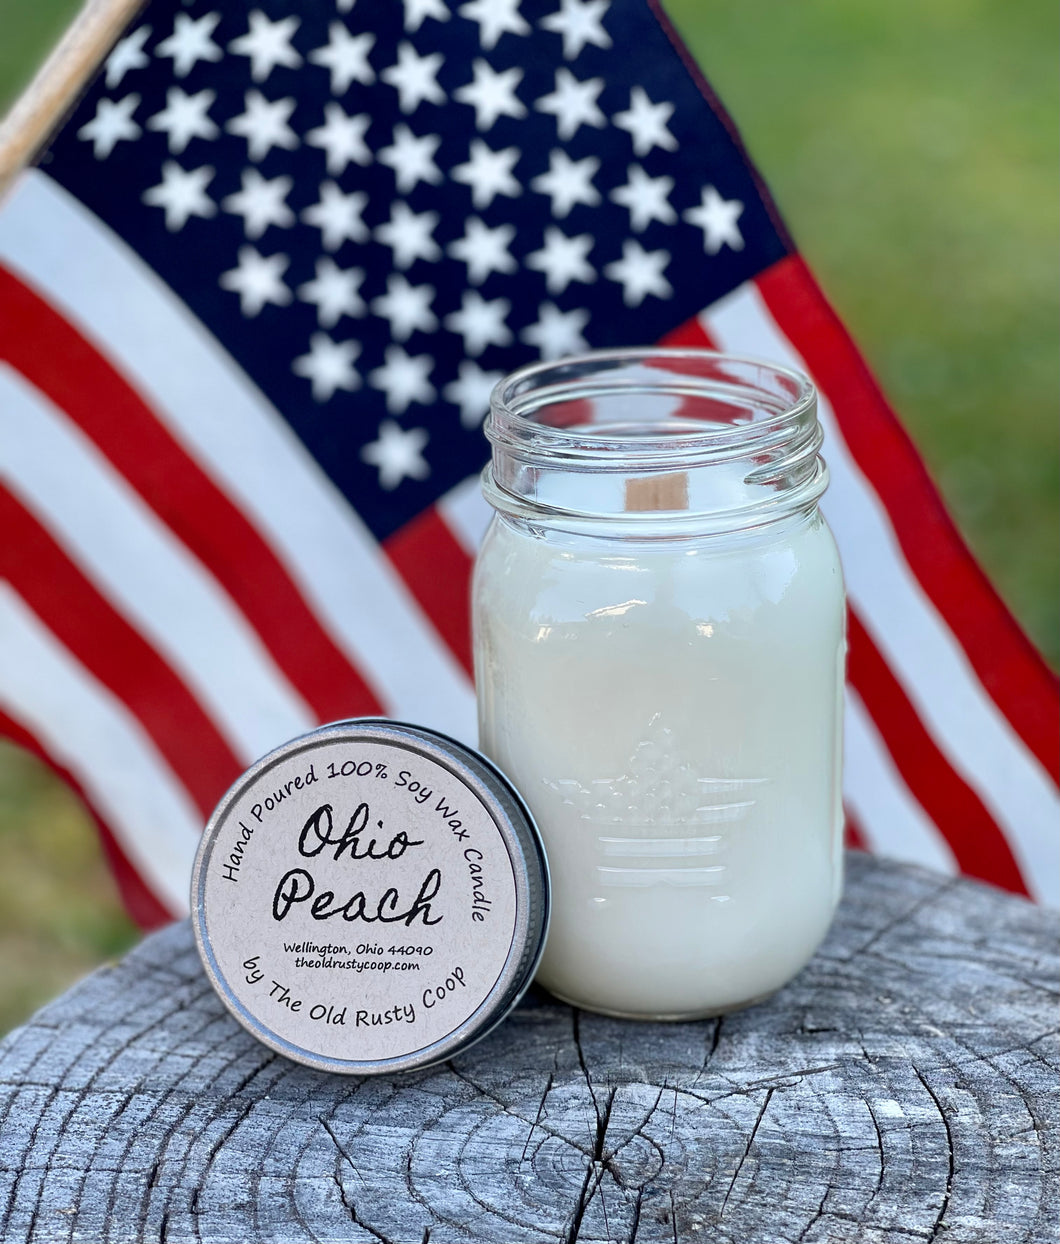 Ohio Peach ~ Patriotic Star ~ Hand Poured 100% Soy Wax Wooden Wick Candle